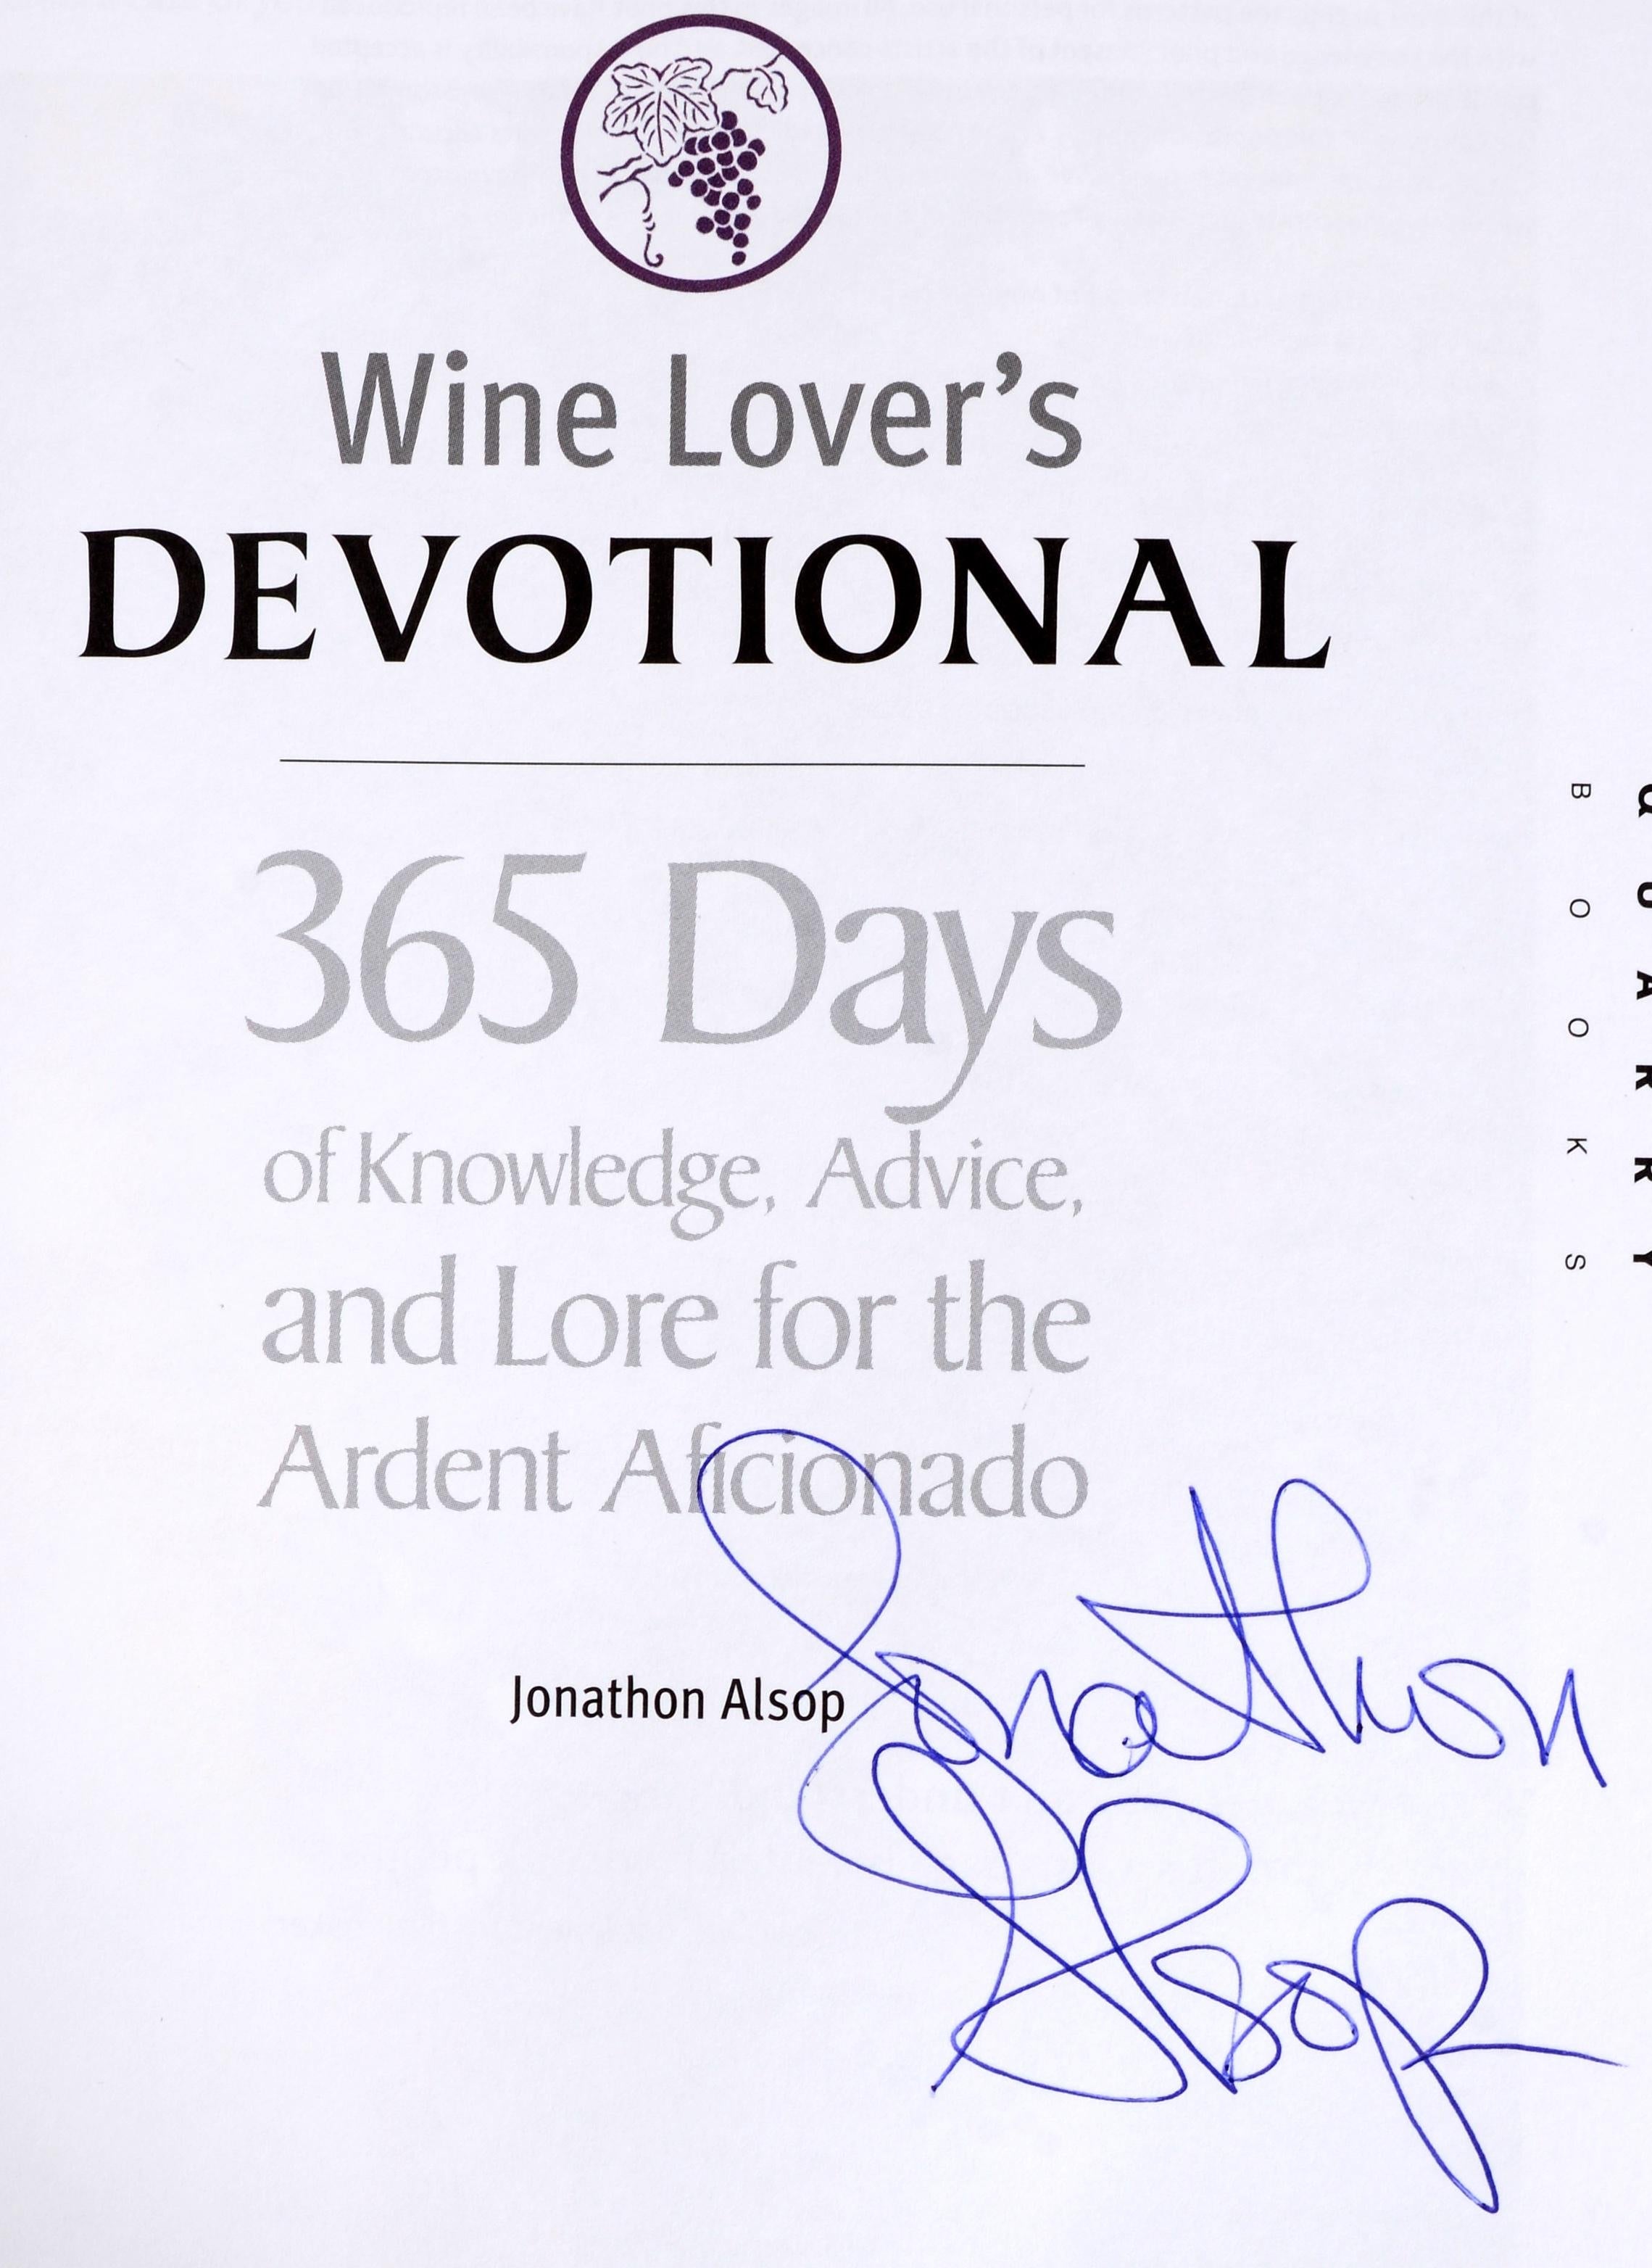 Wine Lover's Devotional: 365 Days of Knowledge, Advice, and Lore for the Ardent Aficionado by and Signed by Jonathon Alsop. Published by Quarry Books, 2010. 1st Ed hardcover. For true oenophiles, there is discipline, devotion, and strict traditions